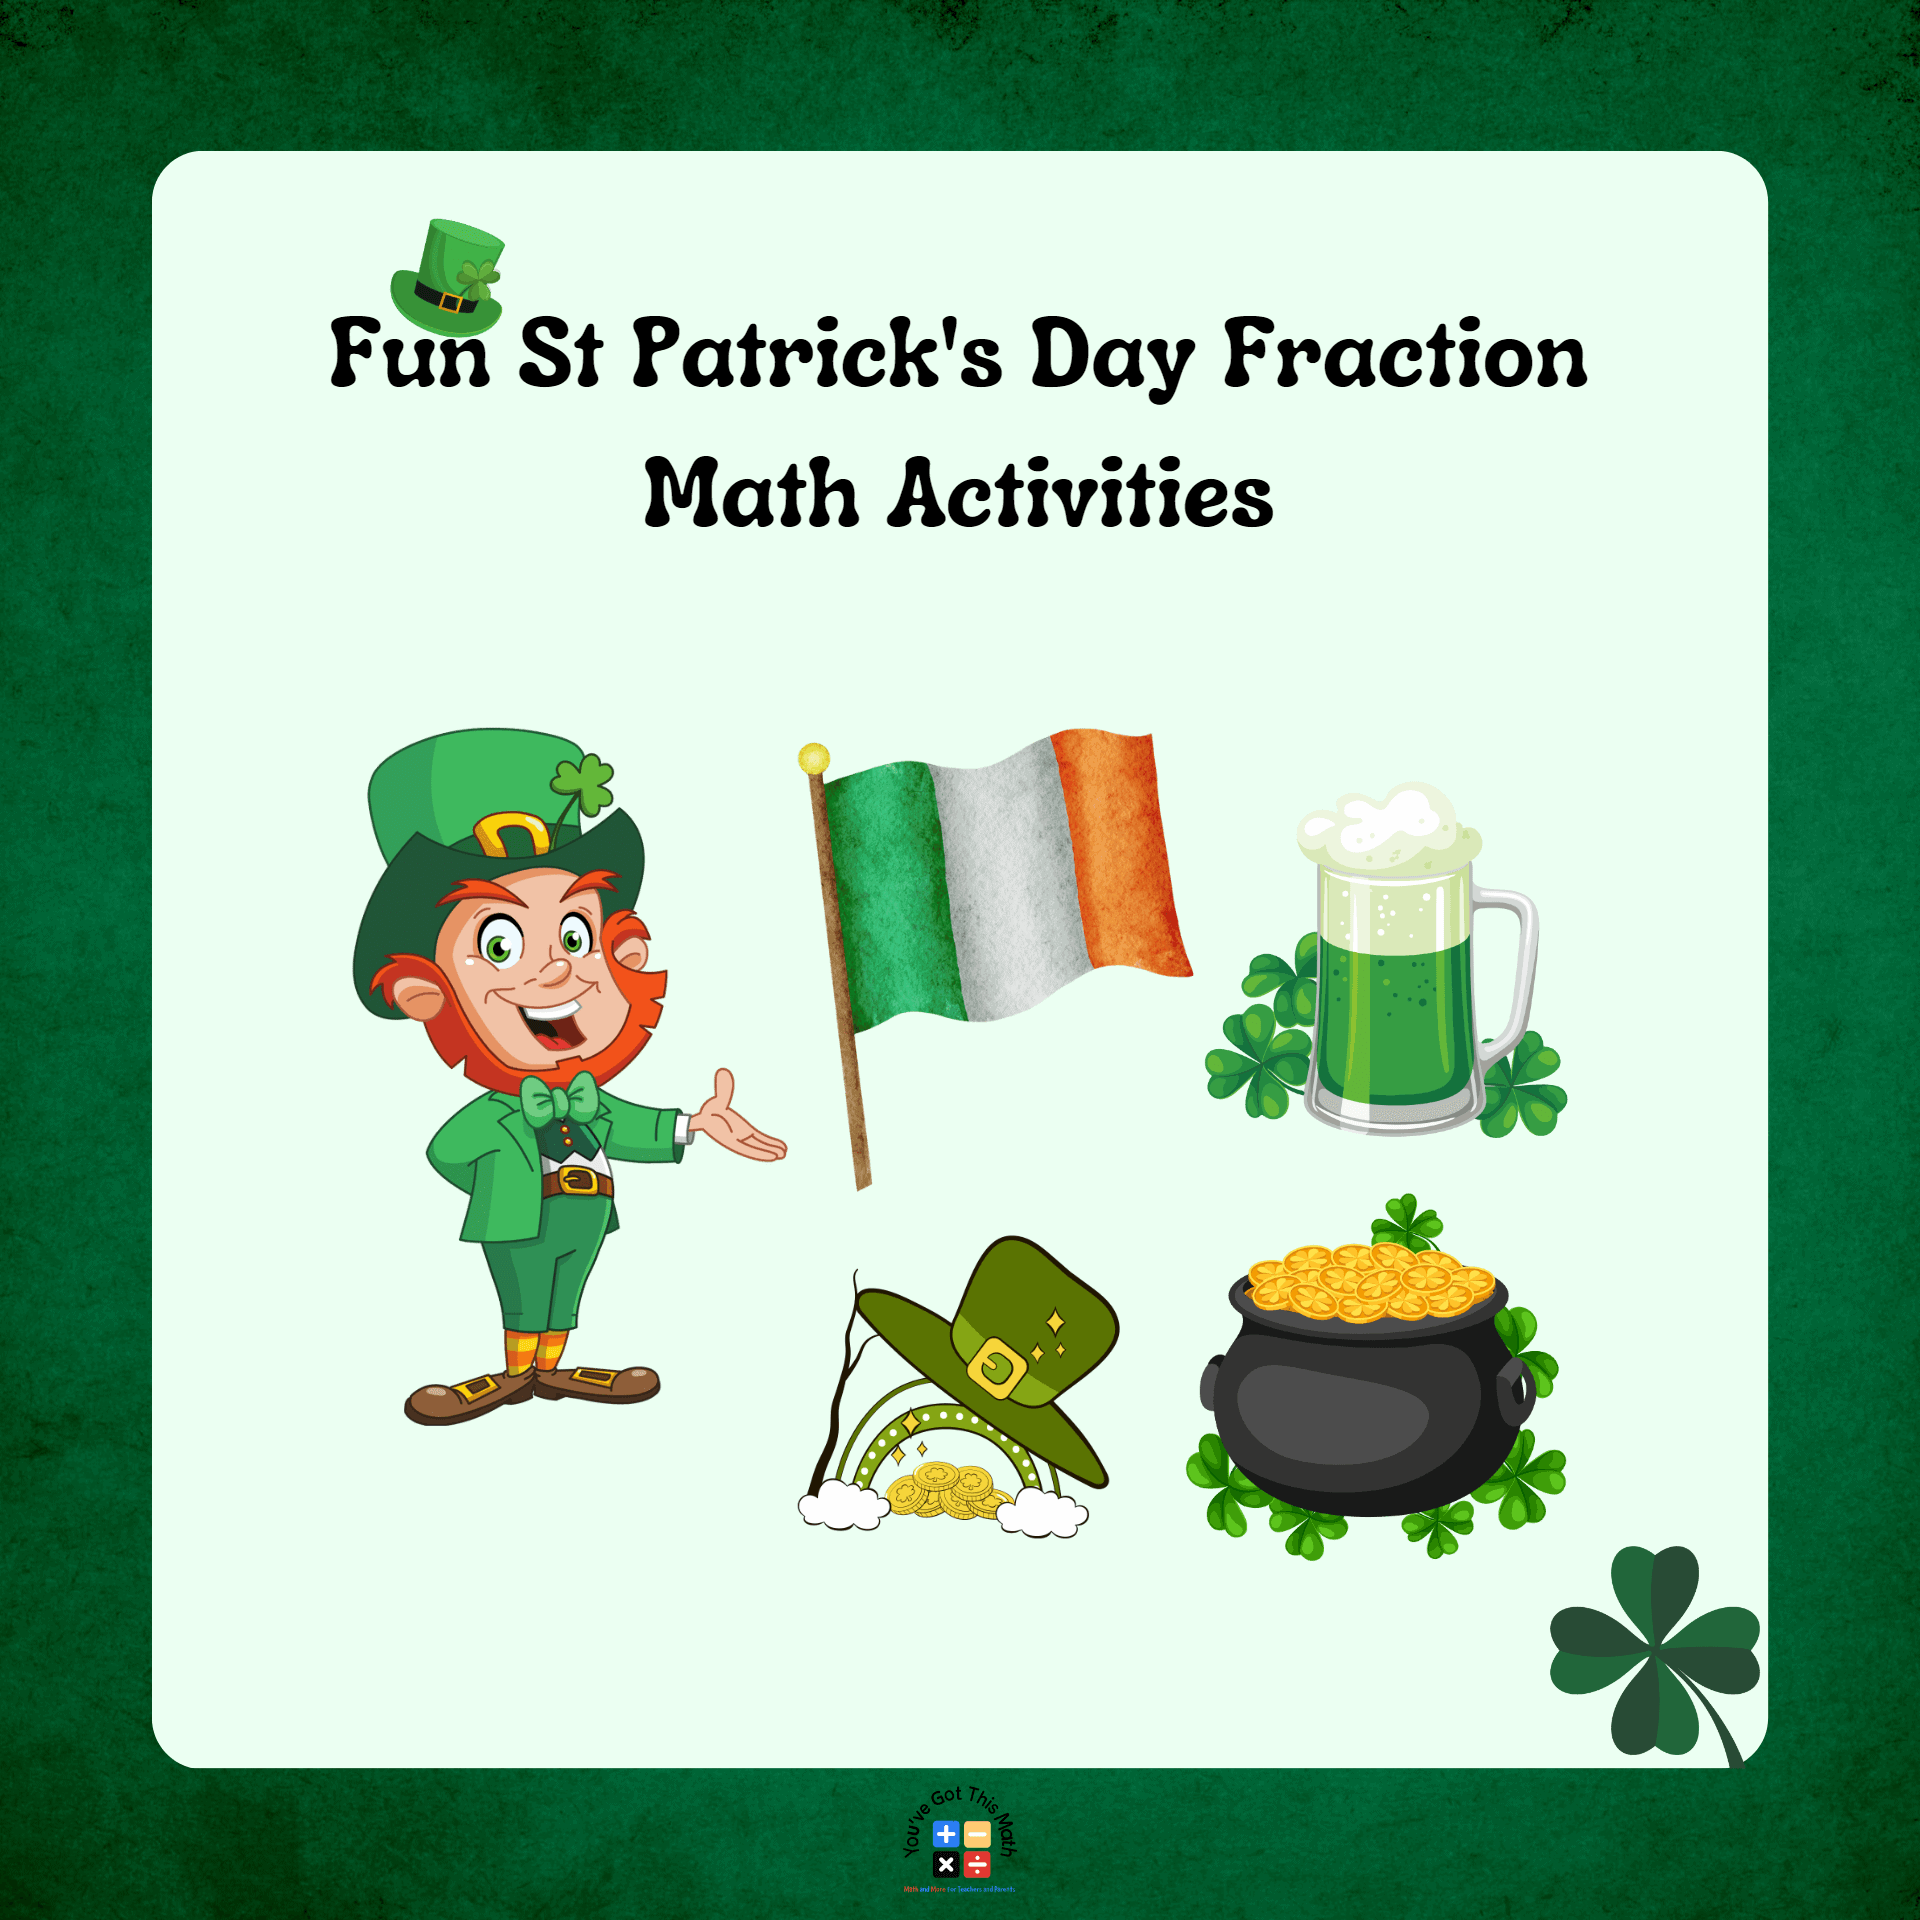 Overview of St. Patrick's Day Fraction Math activities